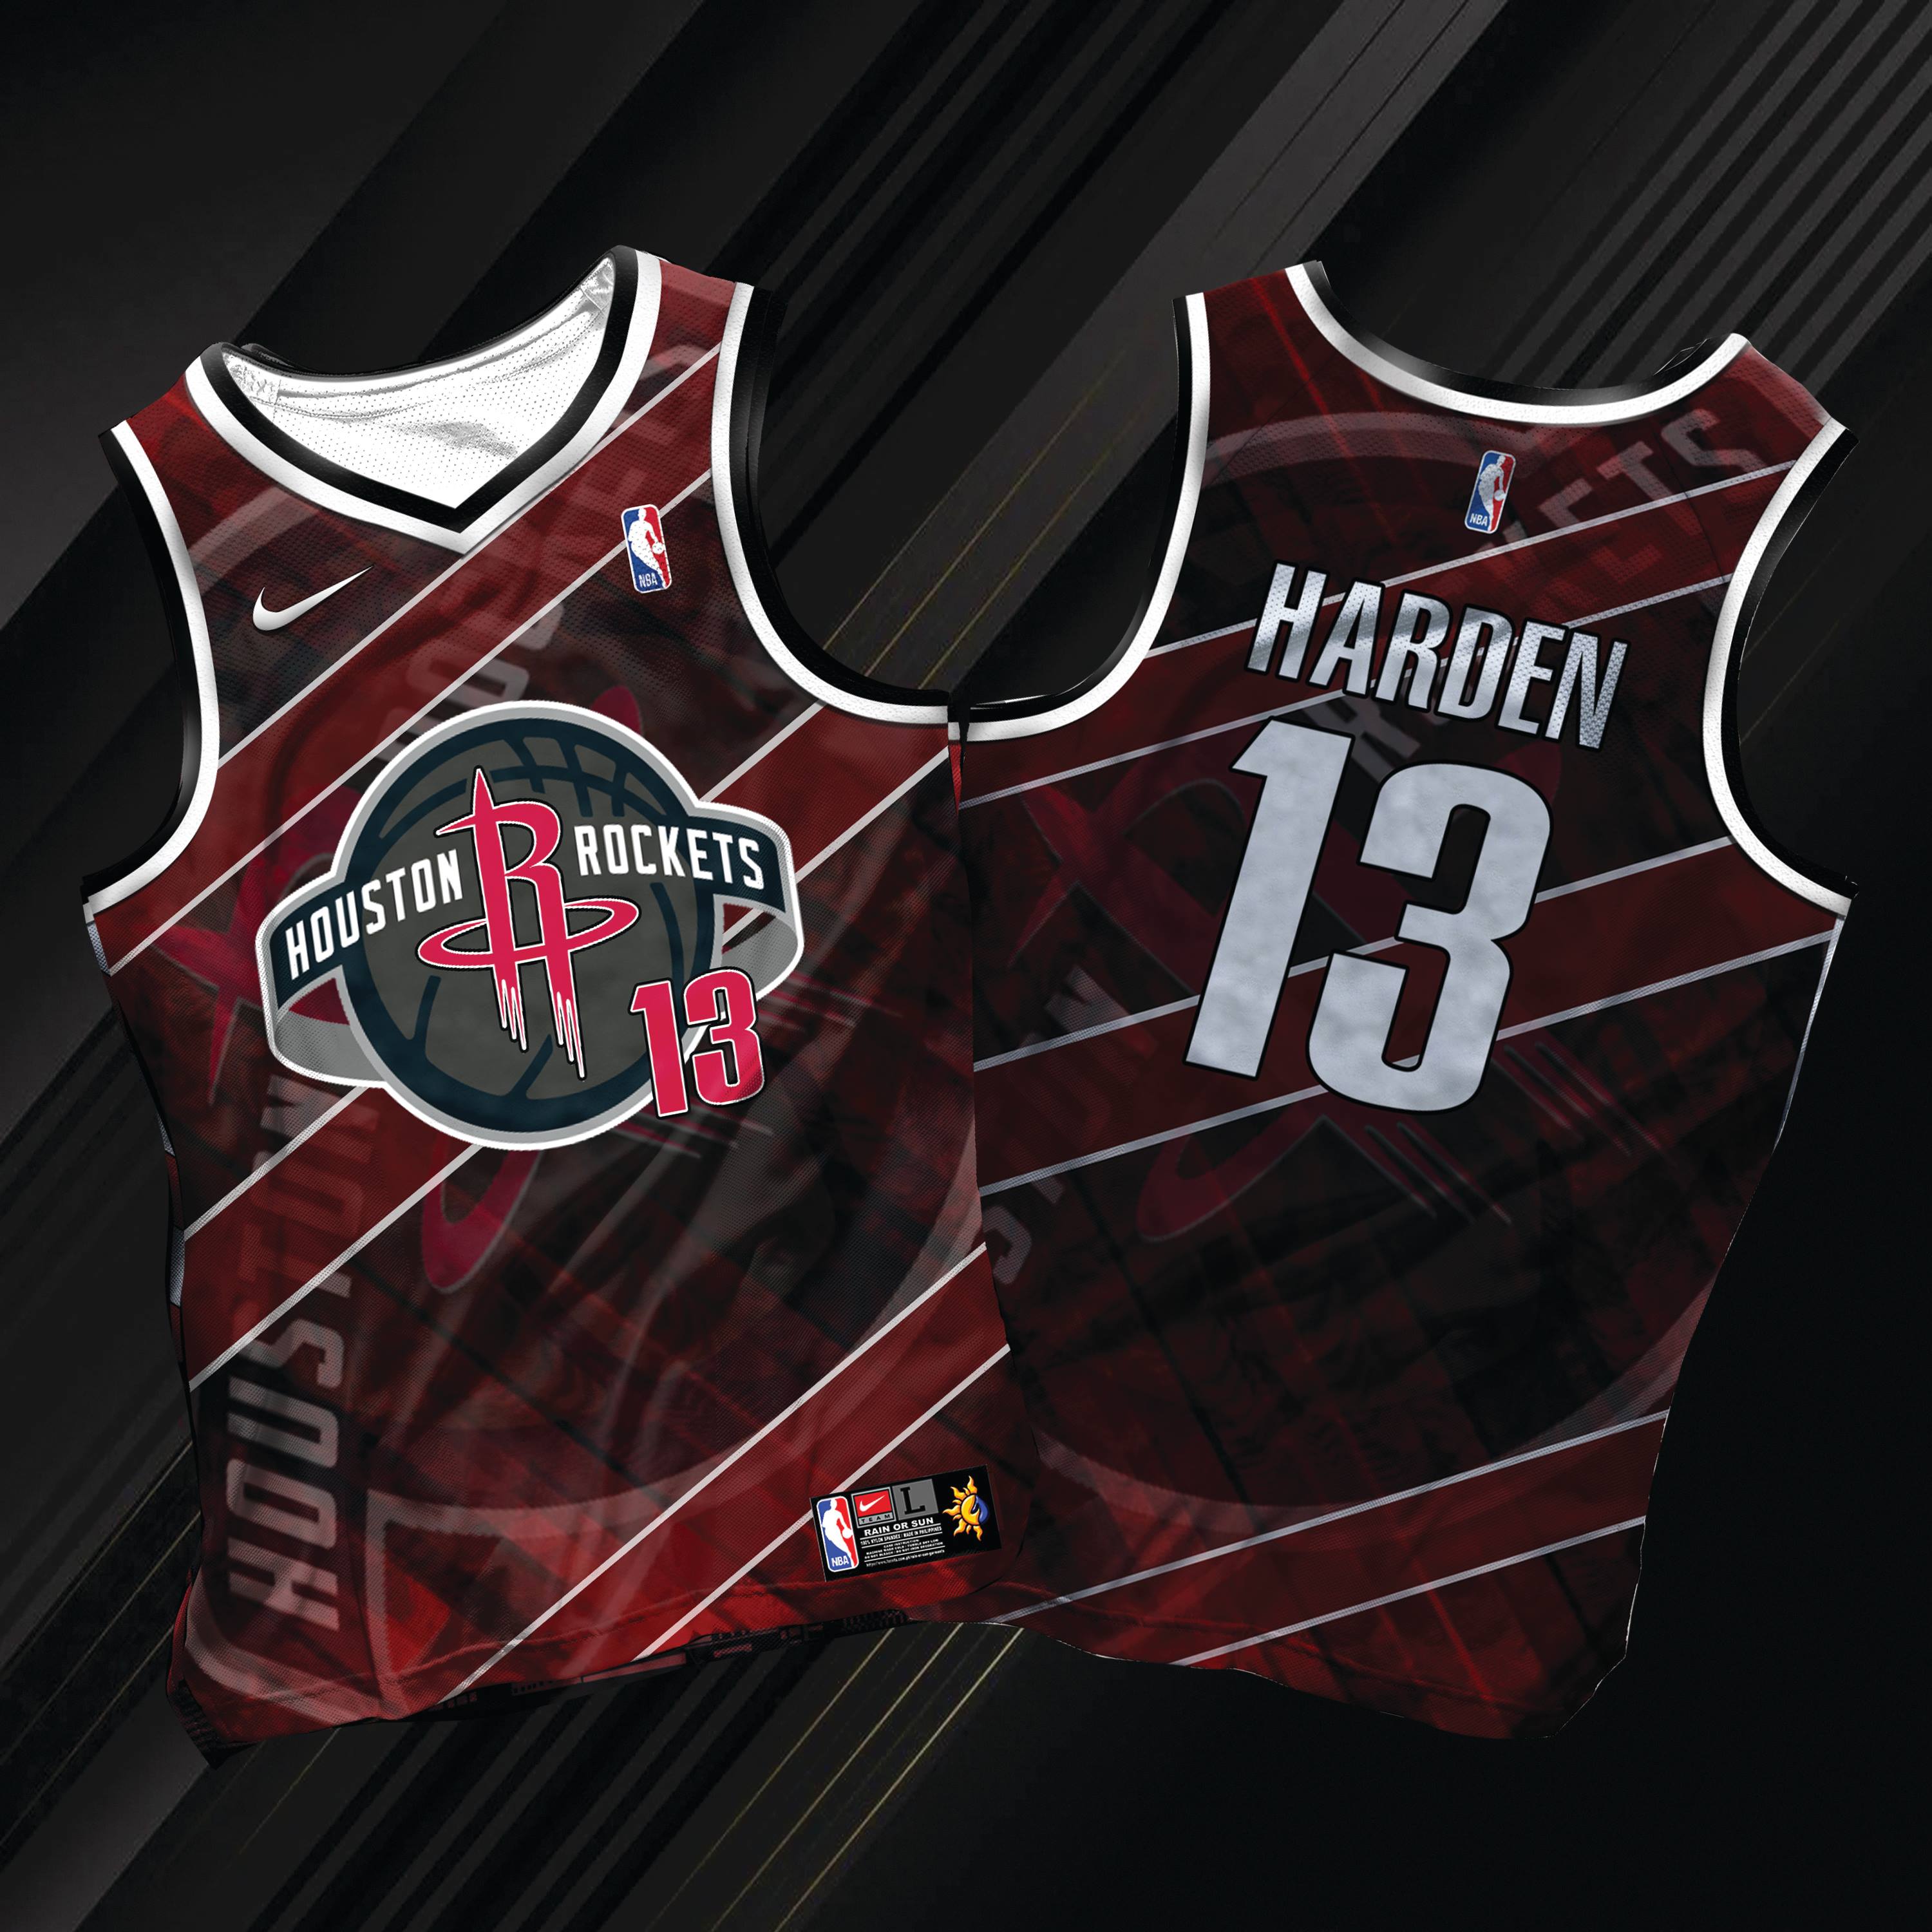 HARDEN OF HOUSTON 02 ROCKETS free customize of name&number only